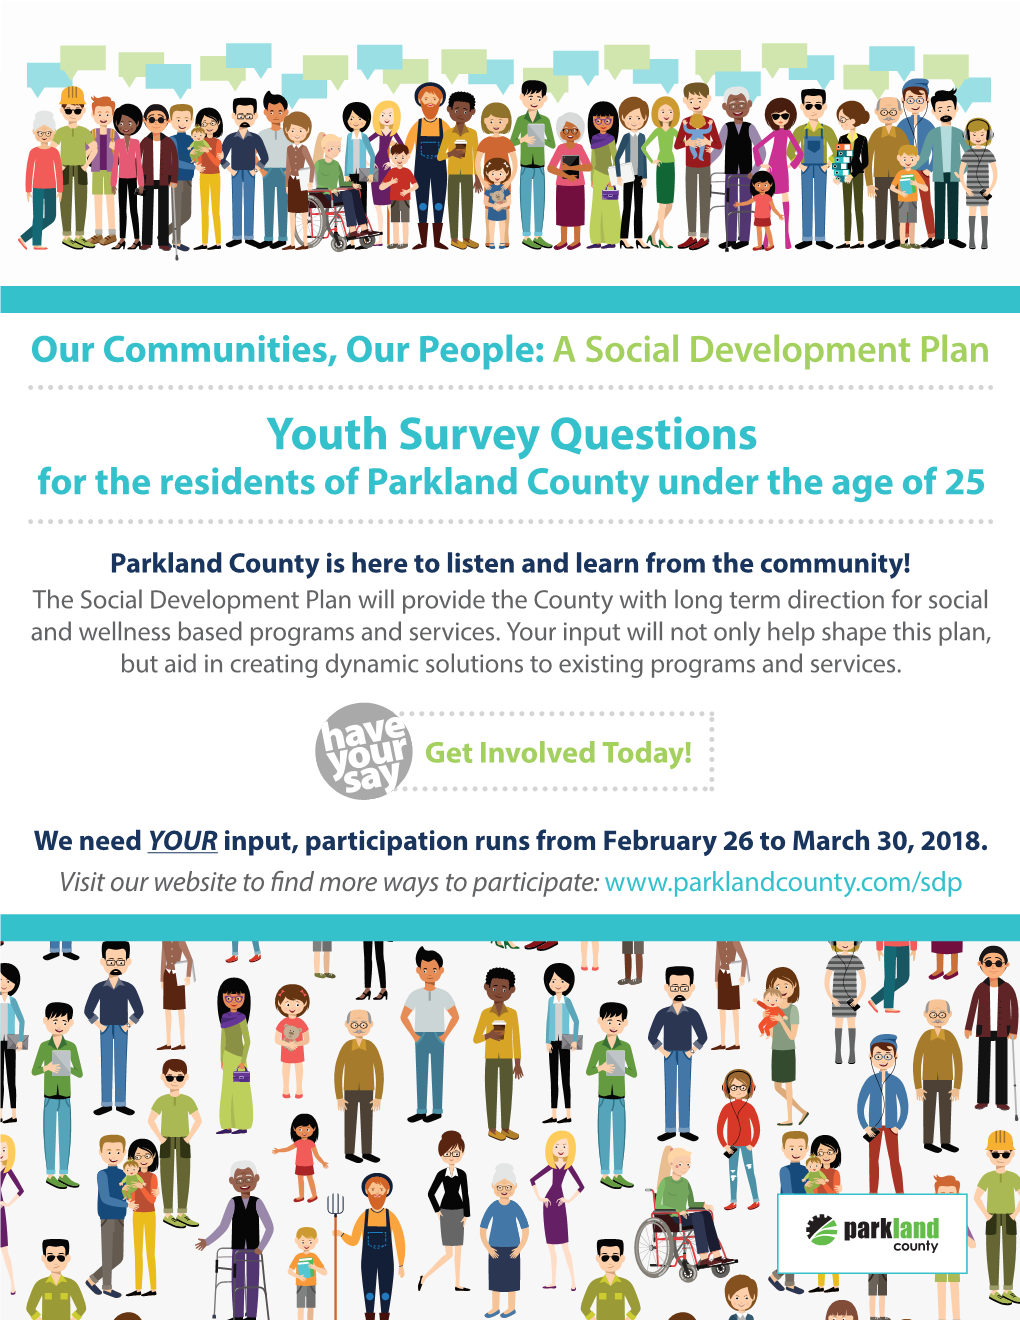 Youth Survey Questions for the Residents of Parkland County Under the Age of 25